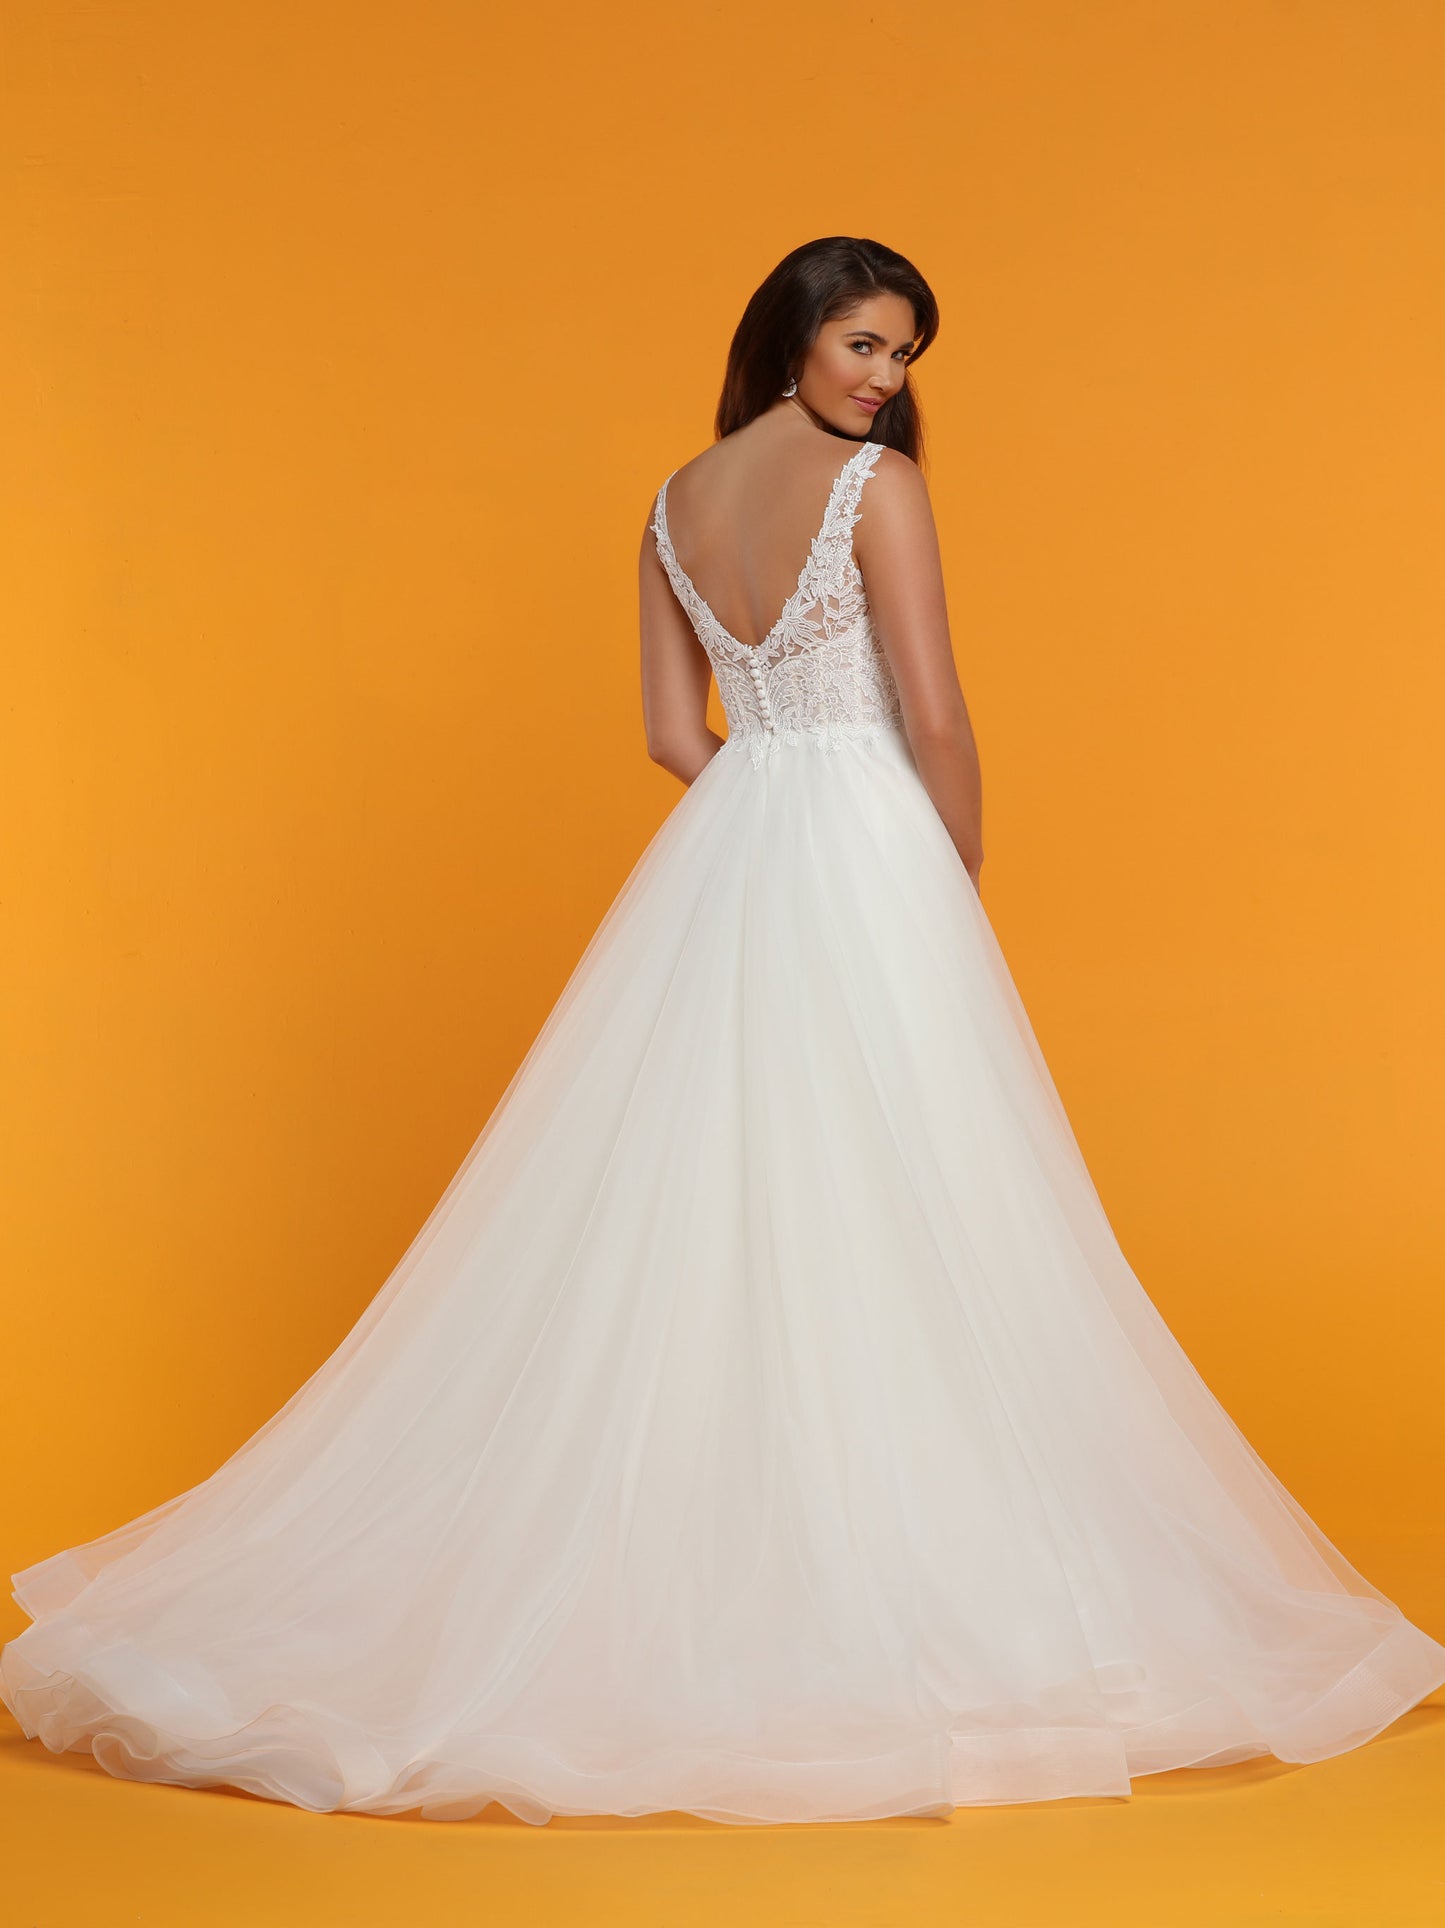 Davinci Bridal 50514 is a Tulle & Lace Ballgown wedding dress with a V neckline and open v back. Embellished lace bodice  Available for 1-2 Week Delivery!!!  Available Sizes: 2,4,6,8,10,12,14,16,18,20  Available Colors: Ivory